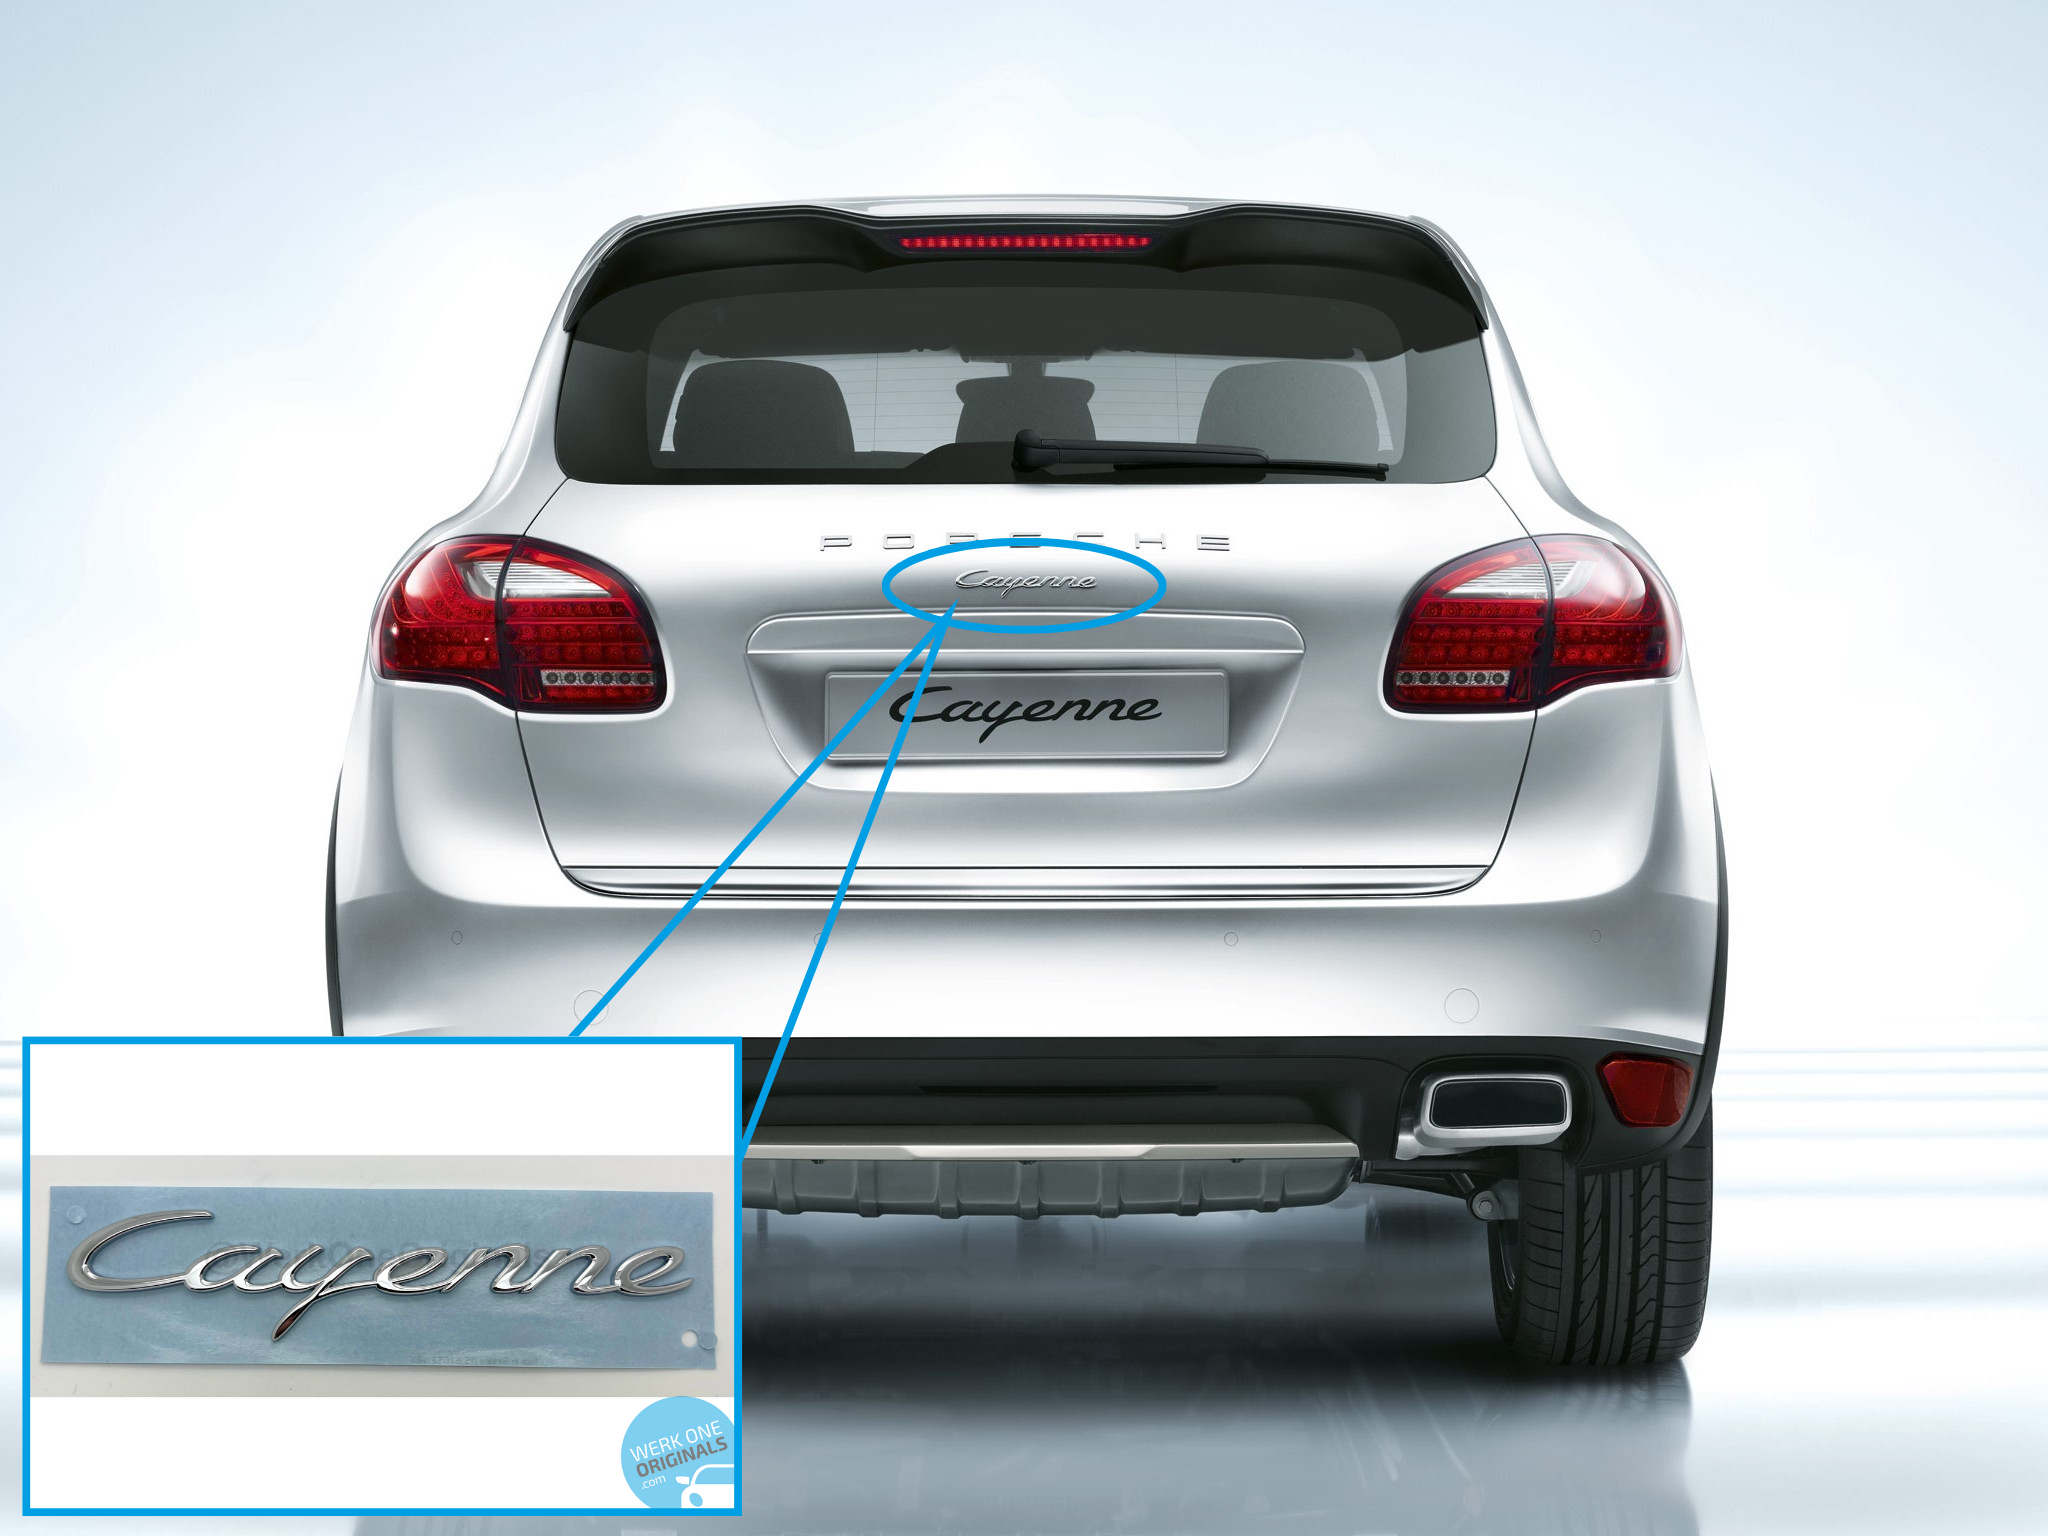 Official Porsche 'Cayenne' Rear Badge Logo in Chrome Silver for Cayenne Type 958 Models